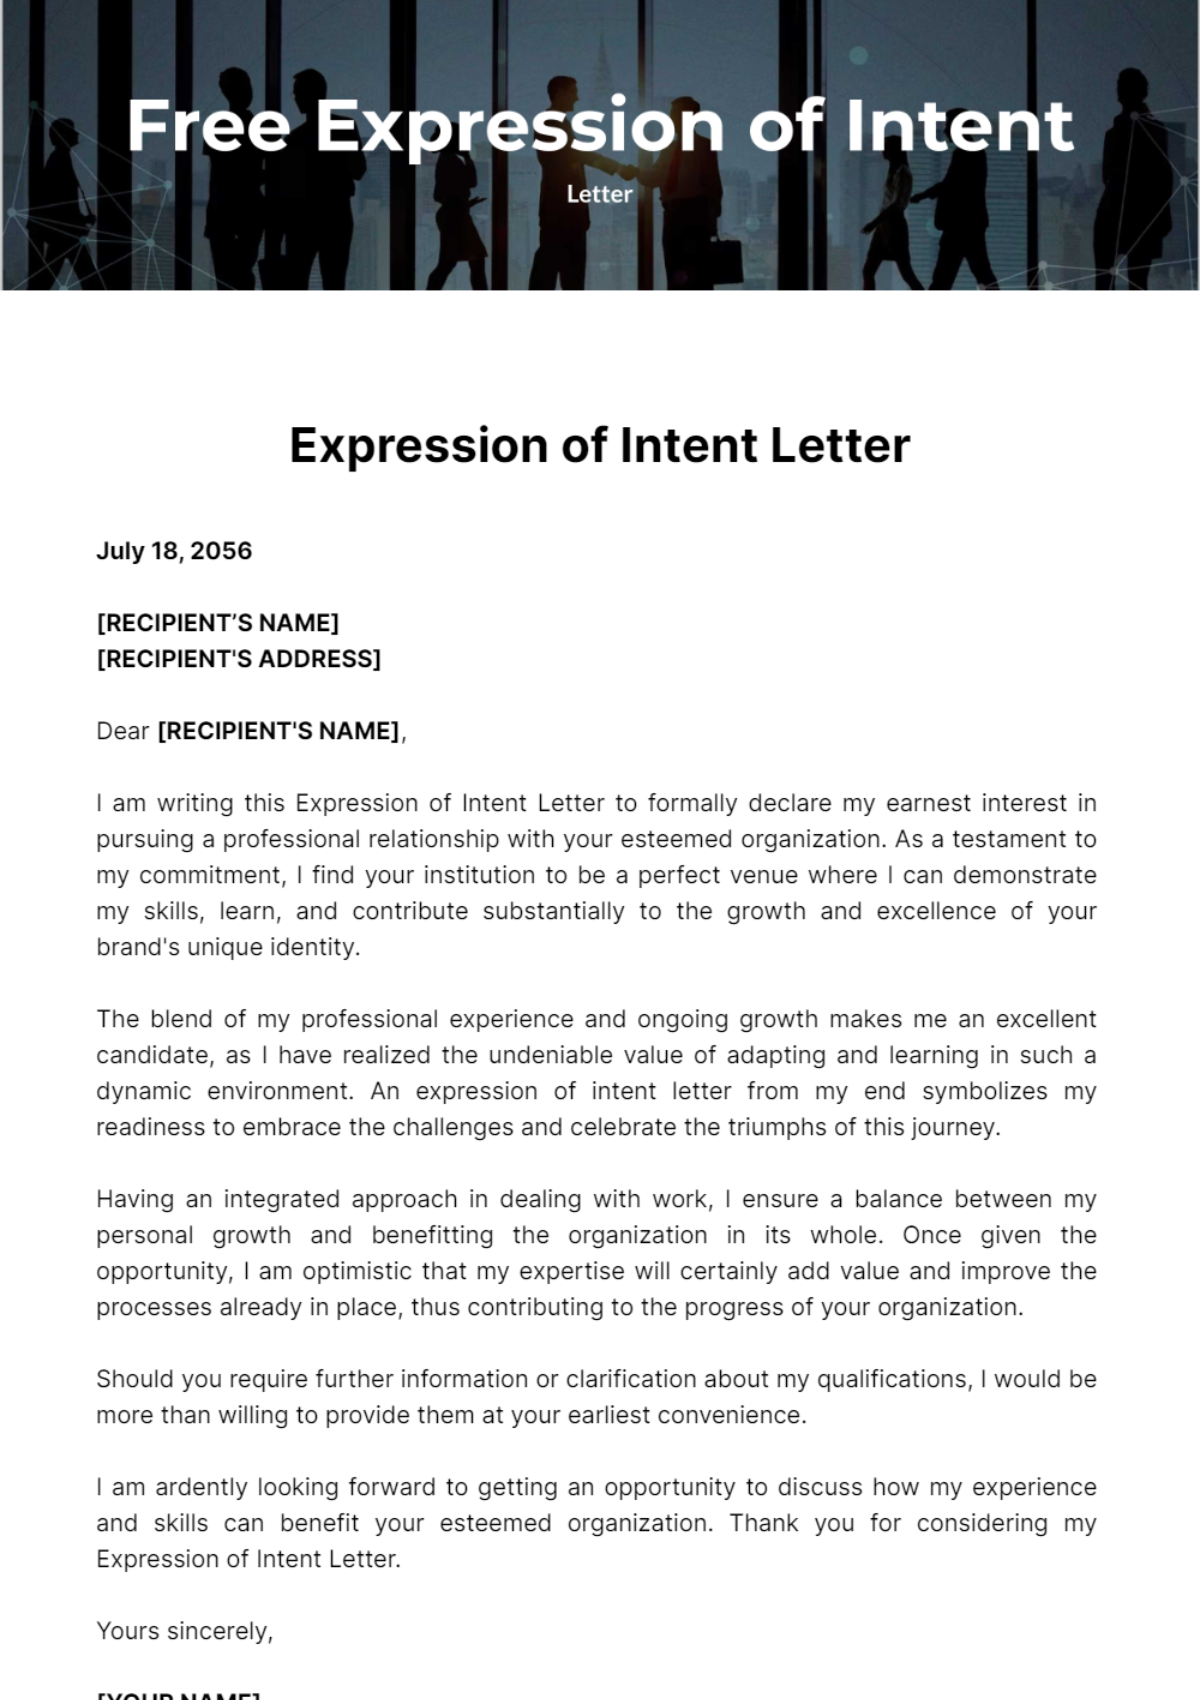 Free Expression of Intent Letter Template